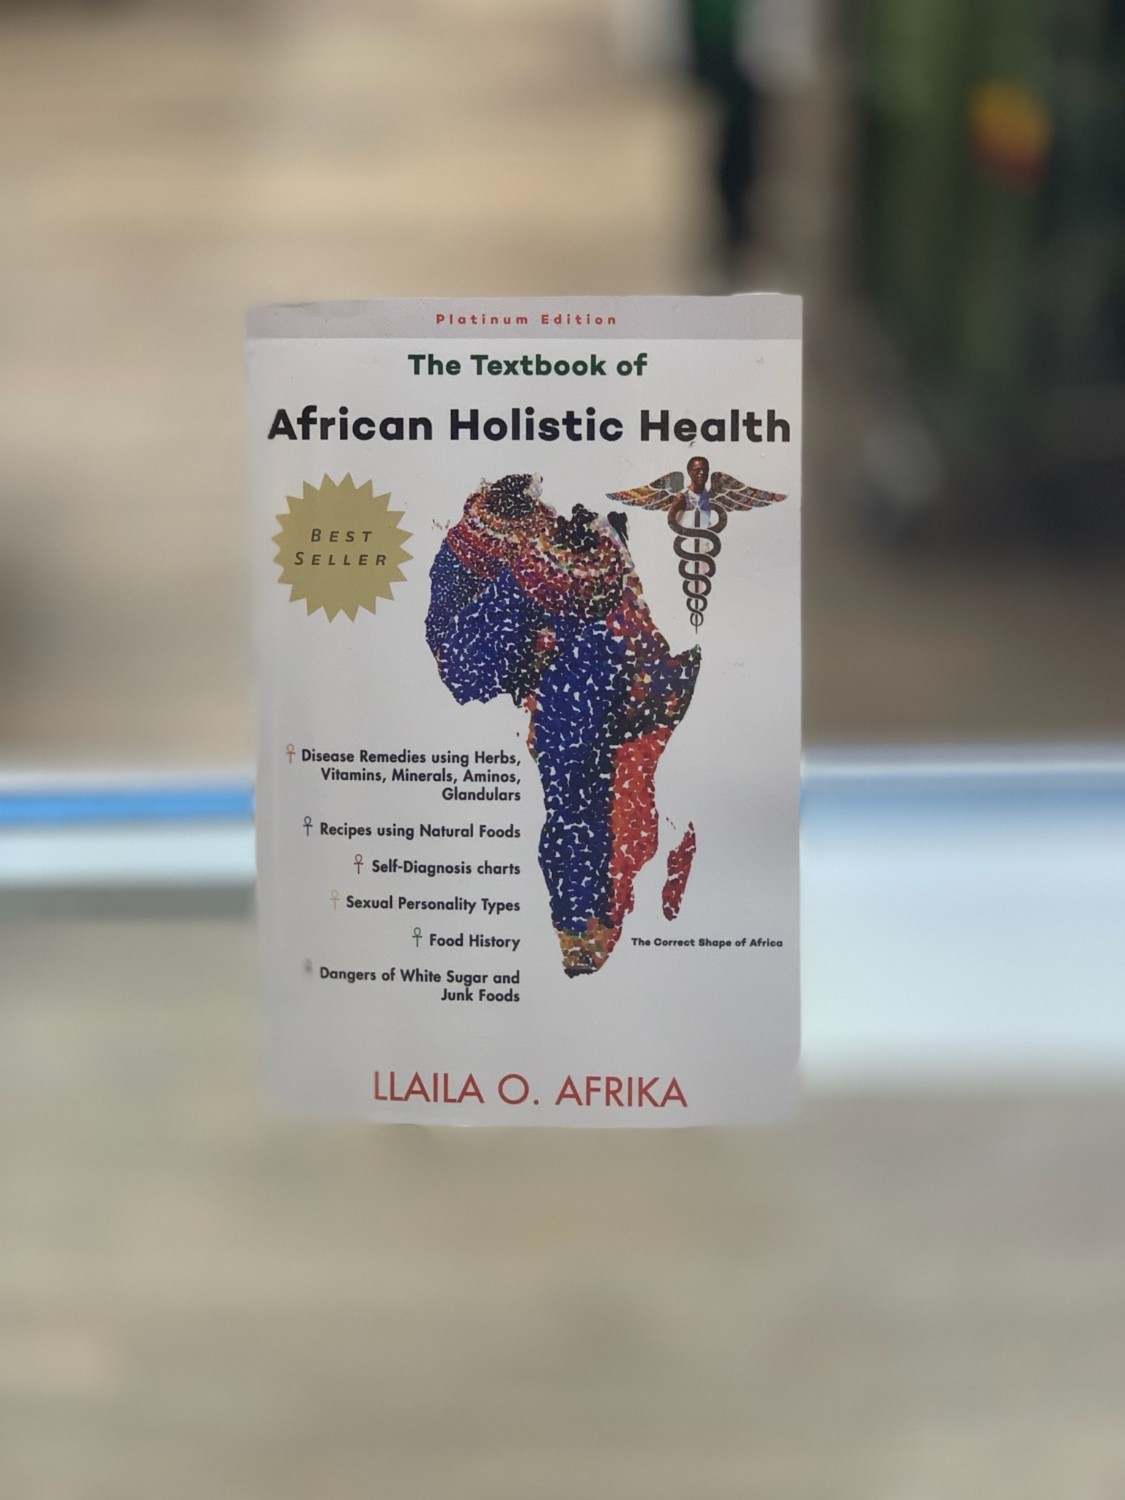 The Textbook of African Holistic Health